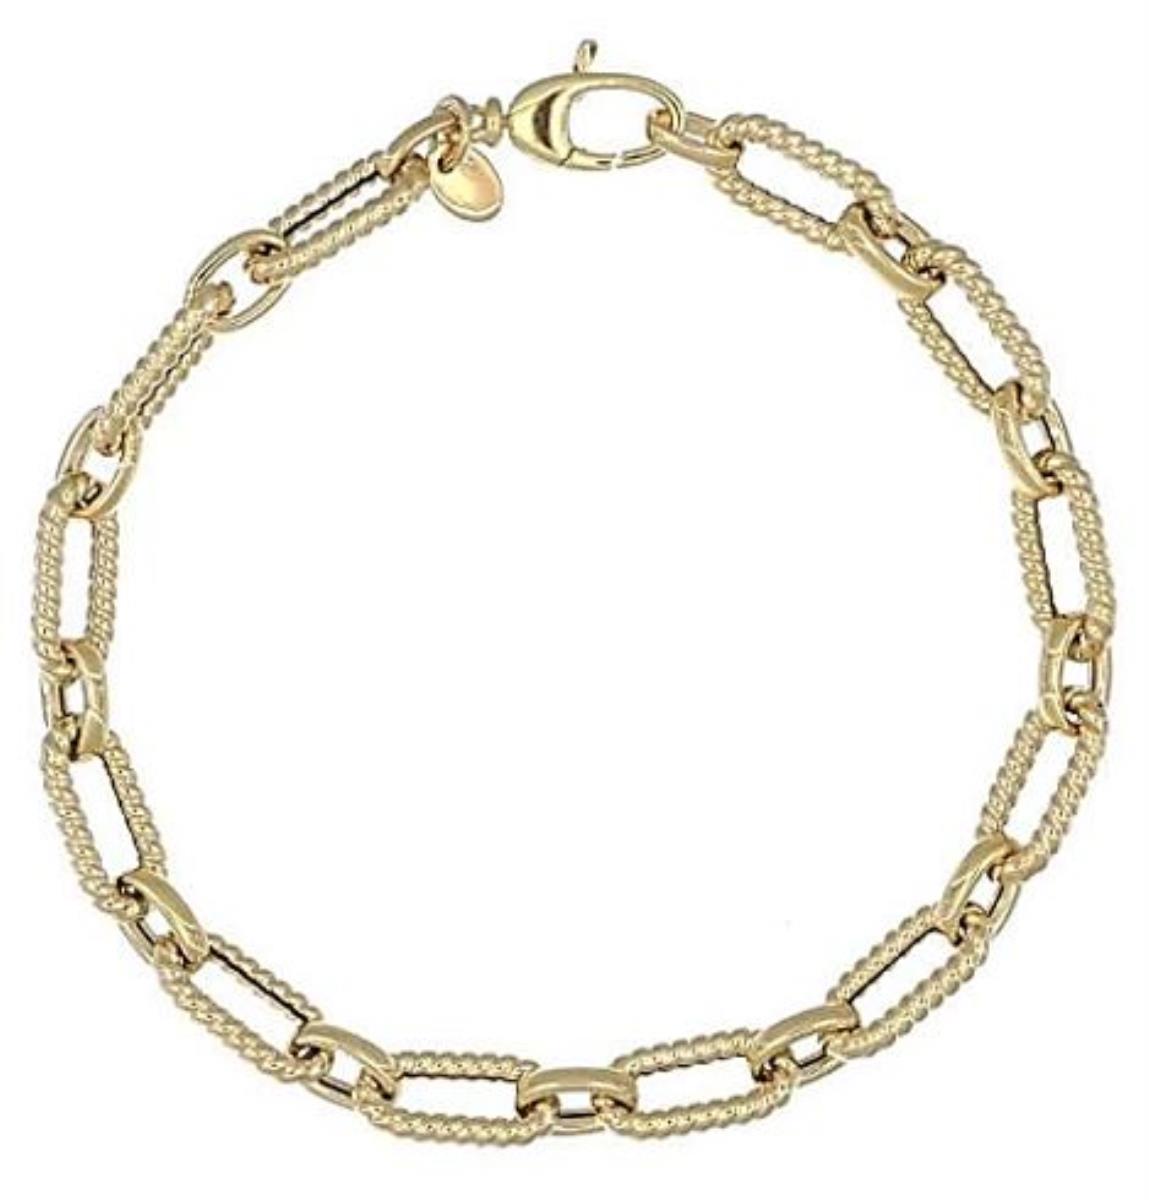 14K Yellow Gold 6.50MM Alternating High Polish and Torchon Rolo Chain Bracelet, 7.50"